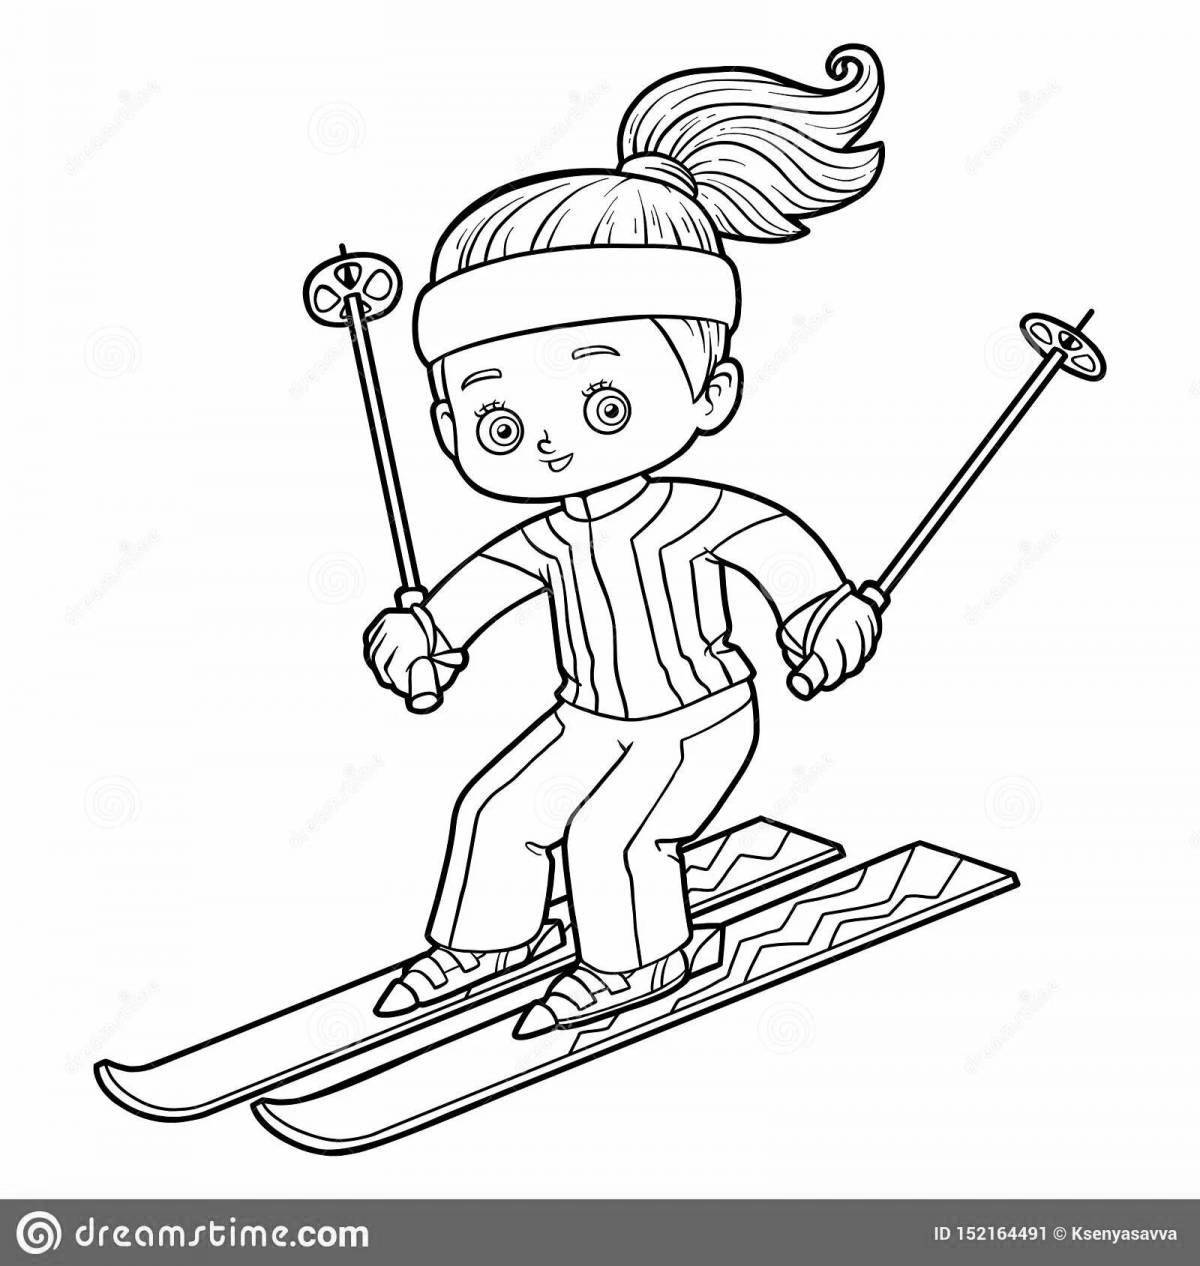 Awesome skiing coloring page